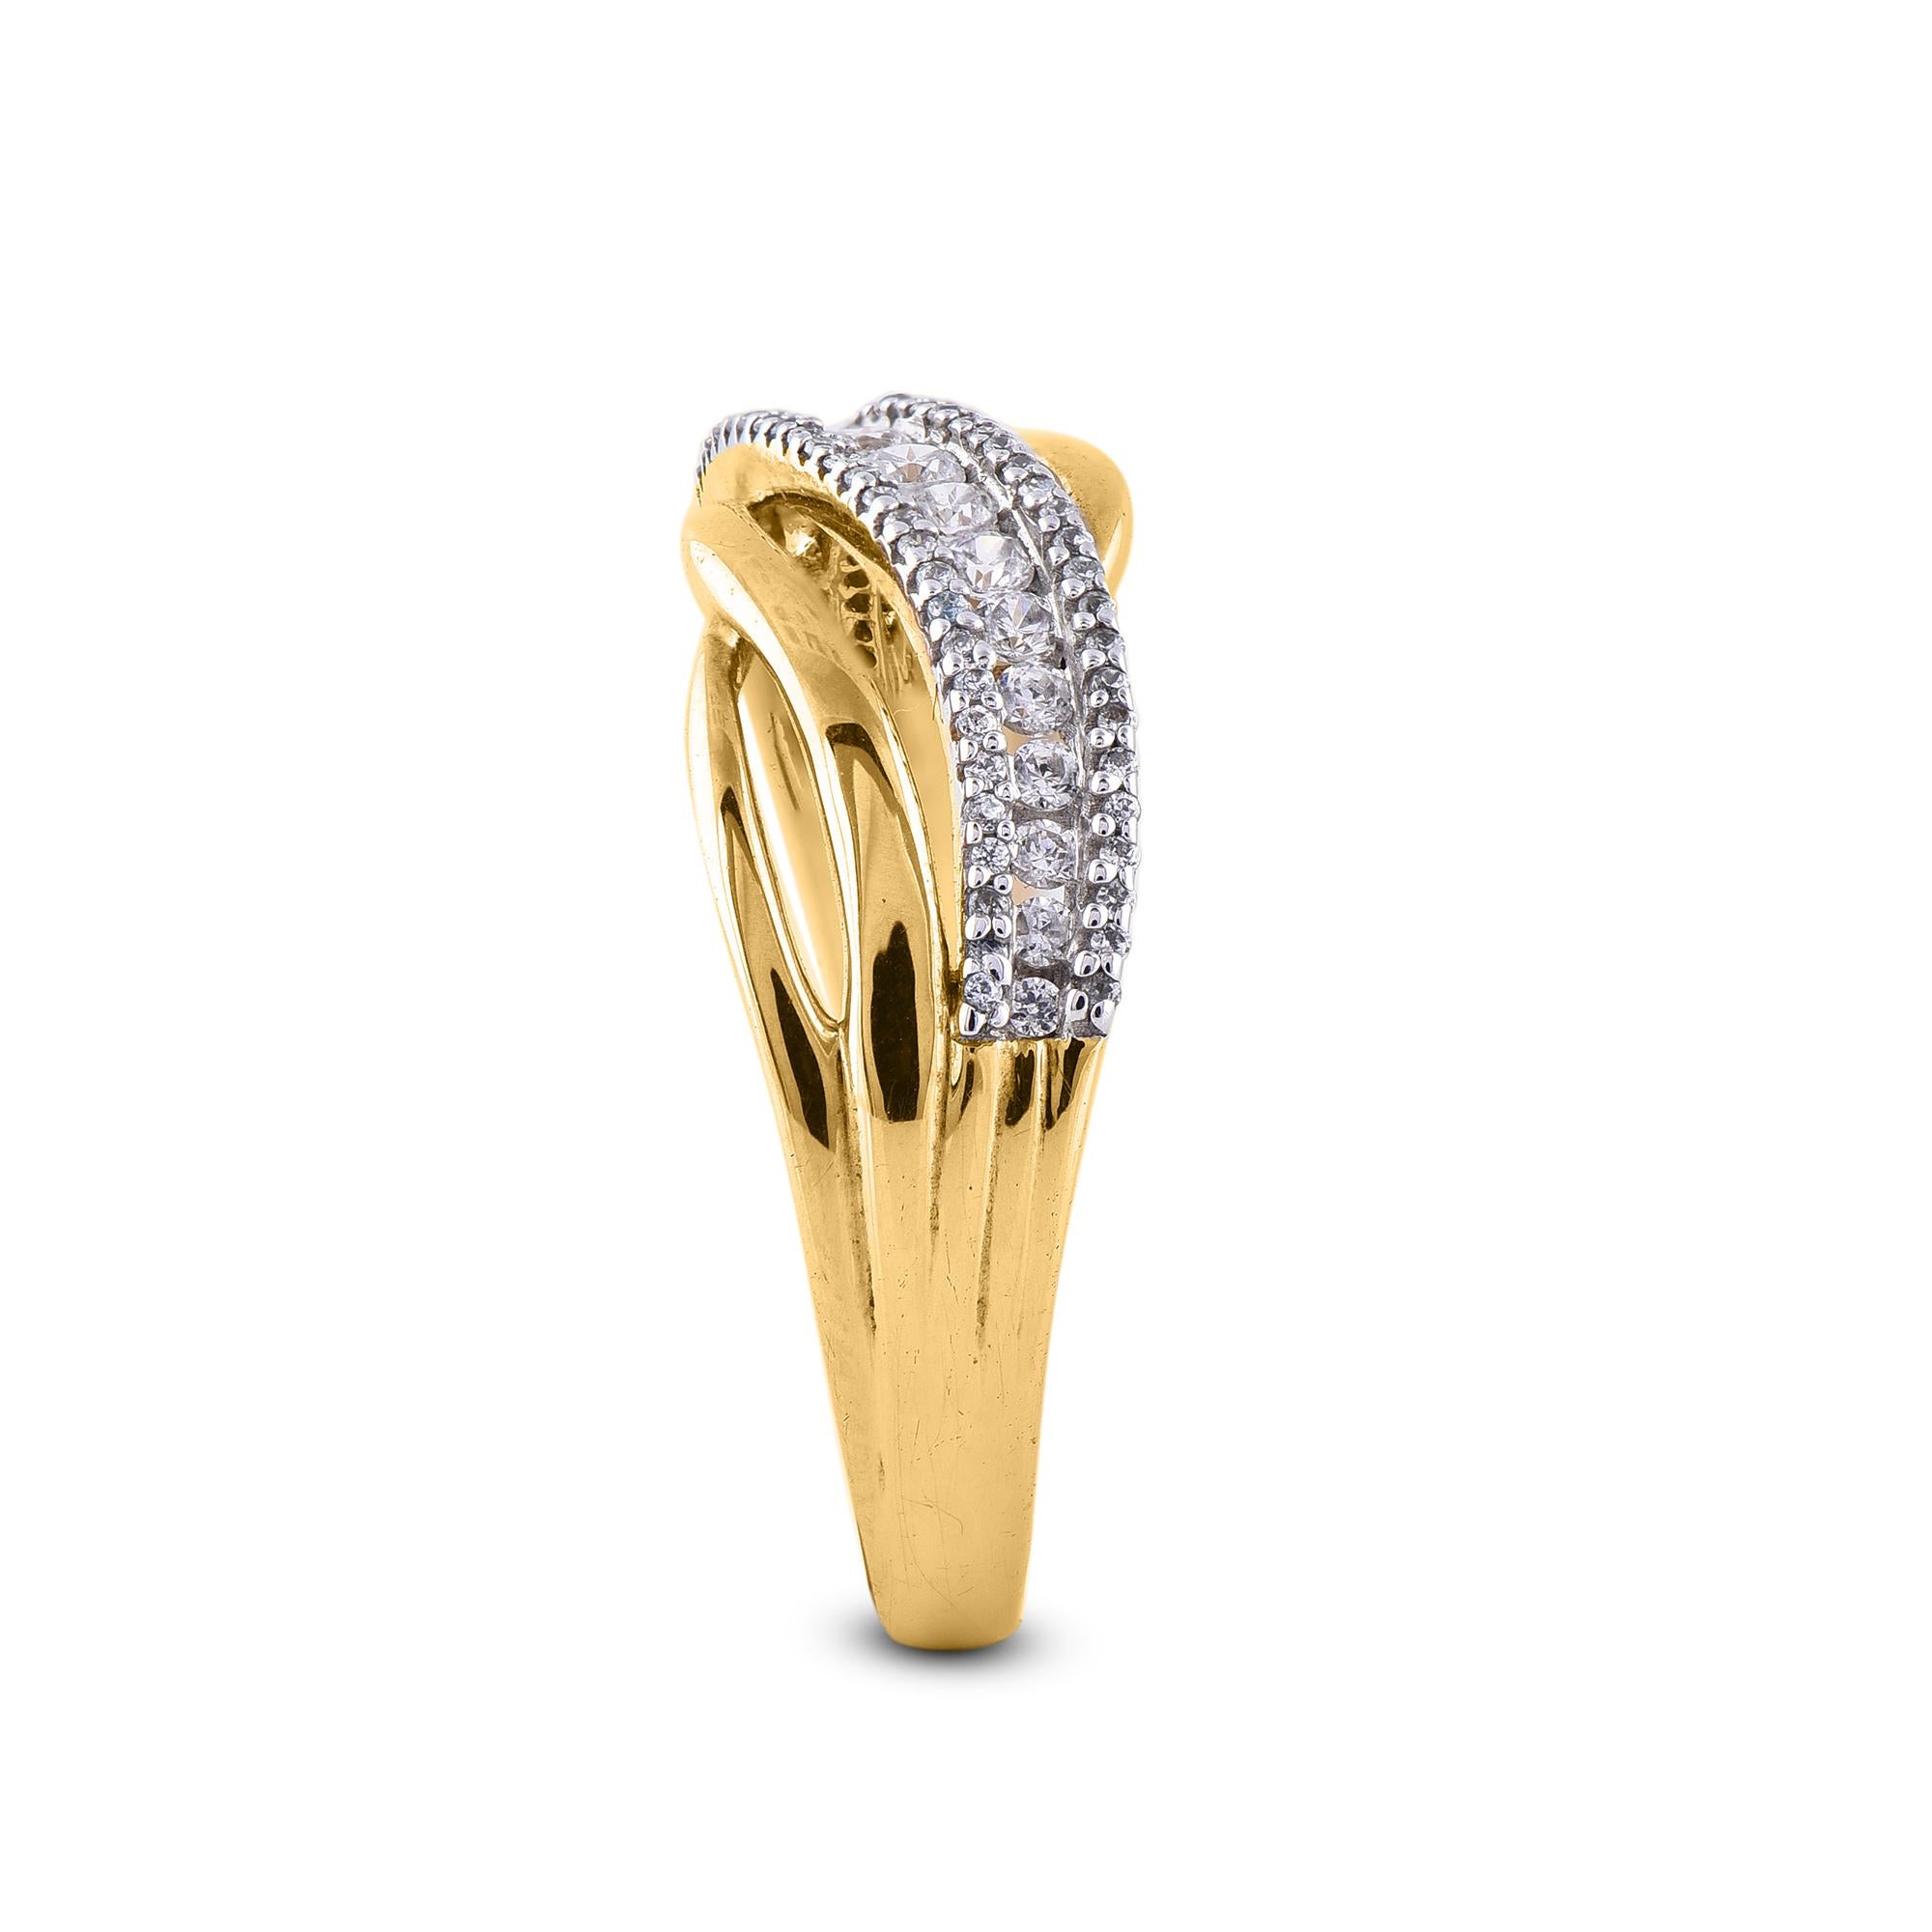 TJD 0.33 Carat Round Diamond 14 Karat Yellow Gold Wavy Shaped Wedding Band Ring In New Condition For Sale In New York, NY